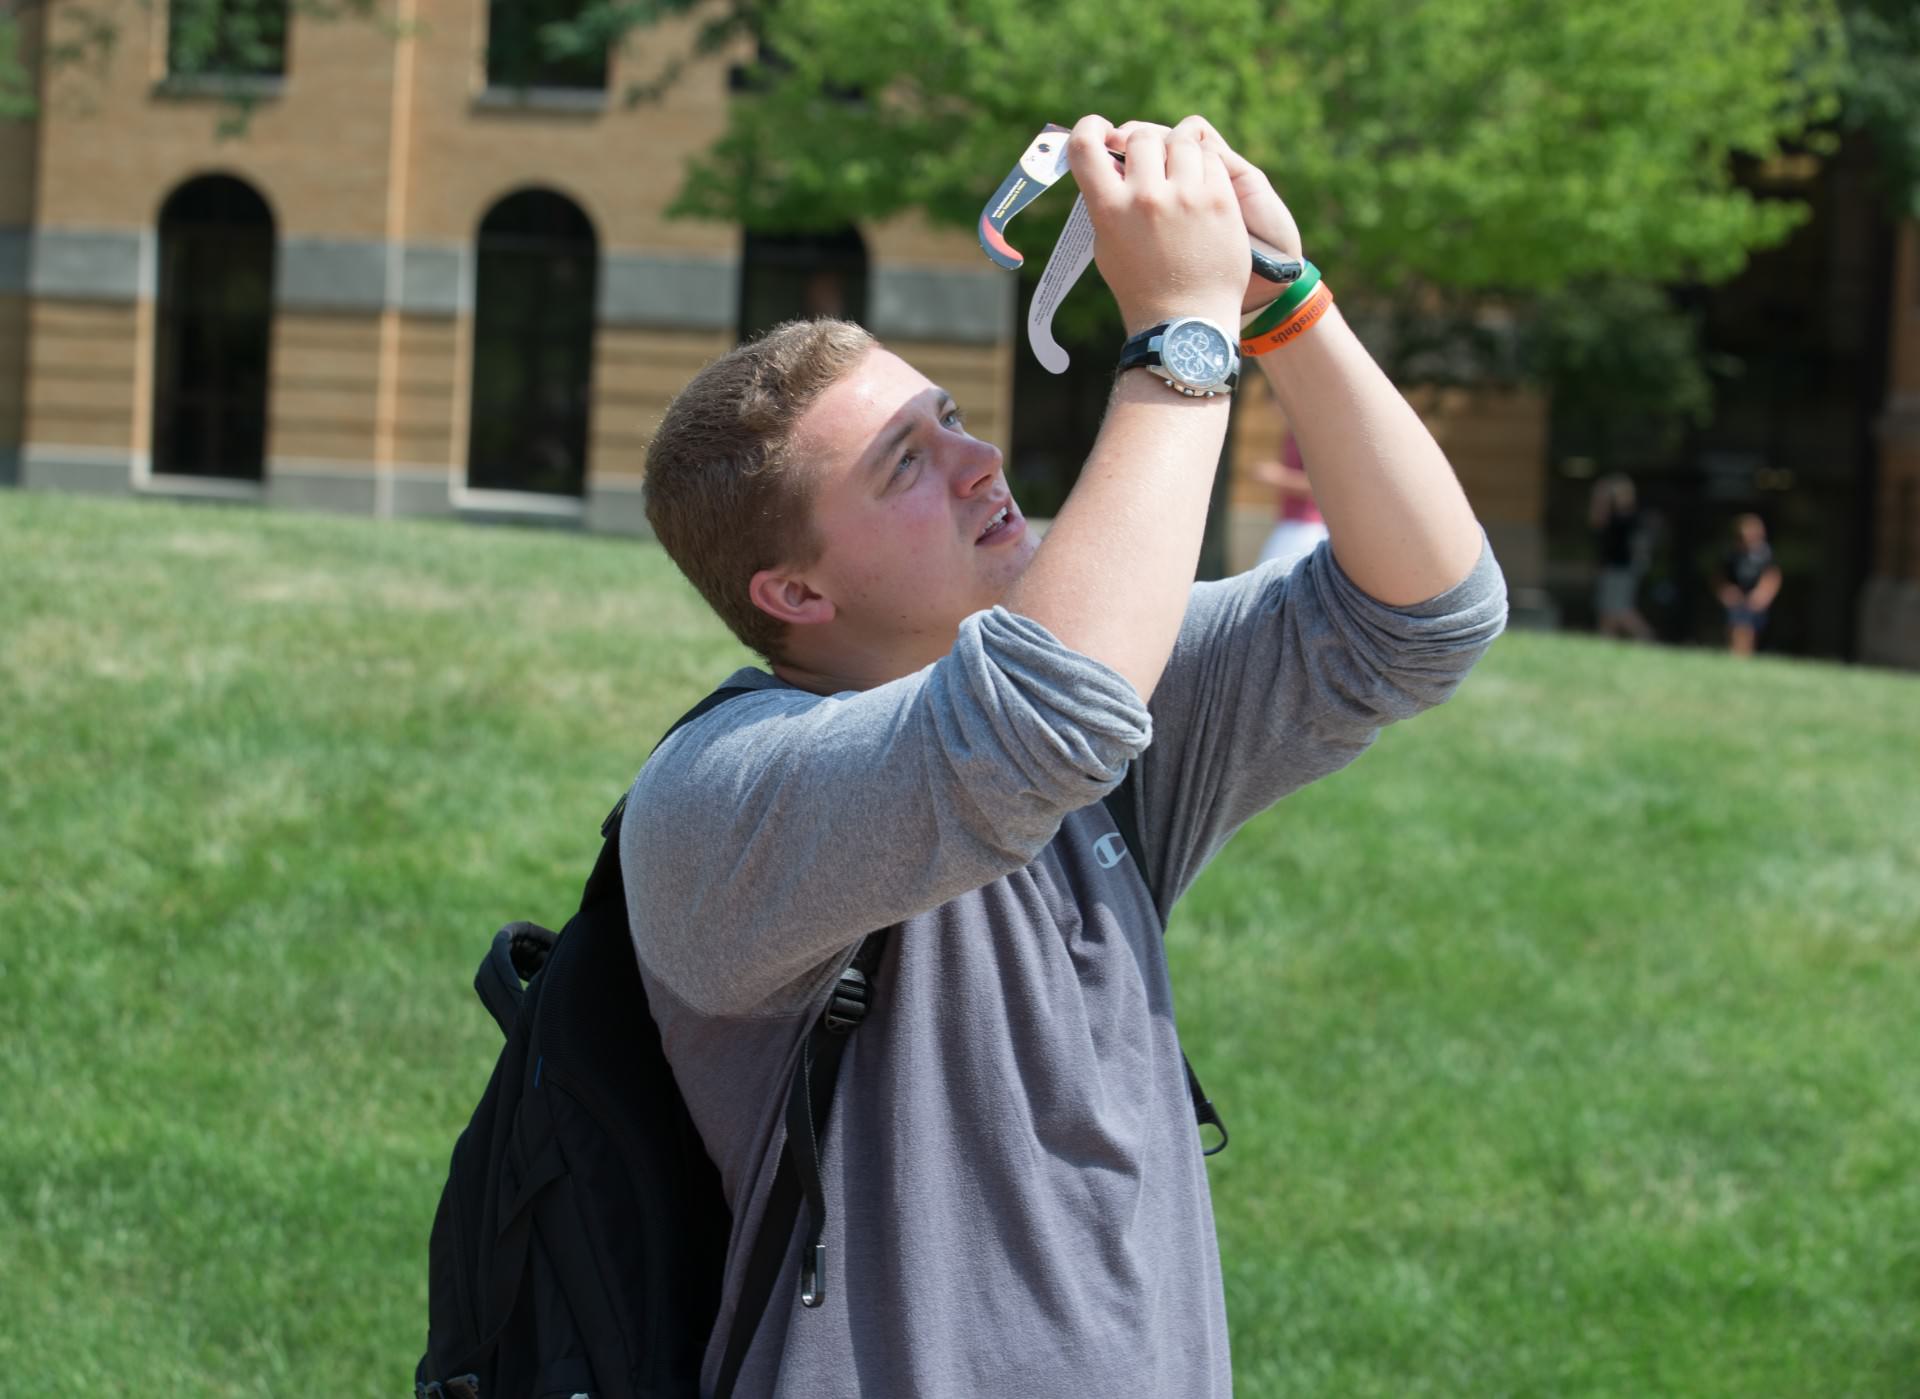 Male student holding solar eclipse glasses over his phone camera